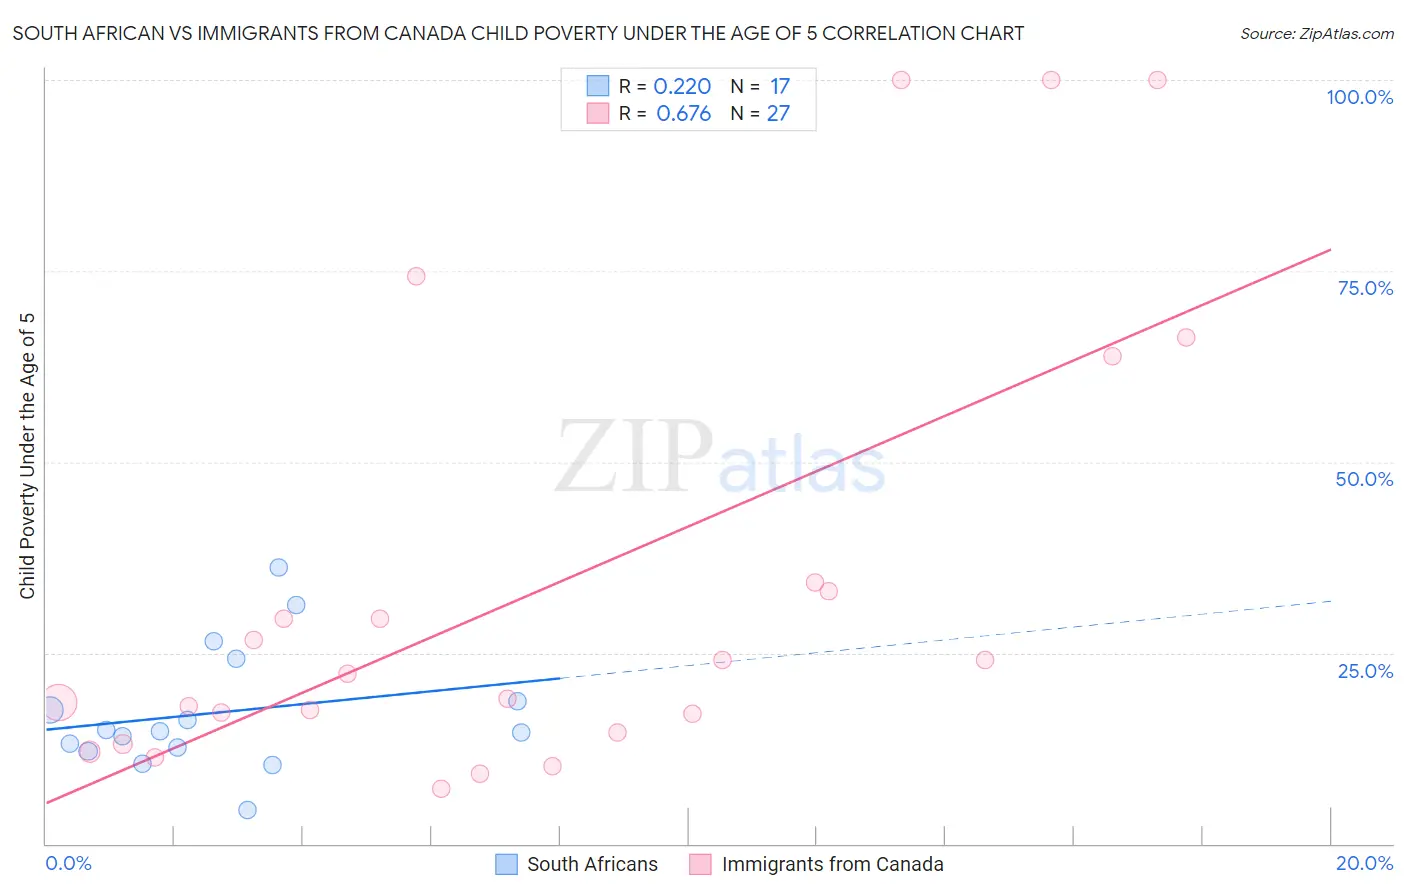 South African vs Immigrants from Canada Child Poverty Under the Age of 5